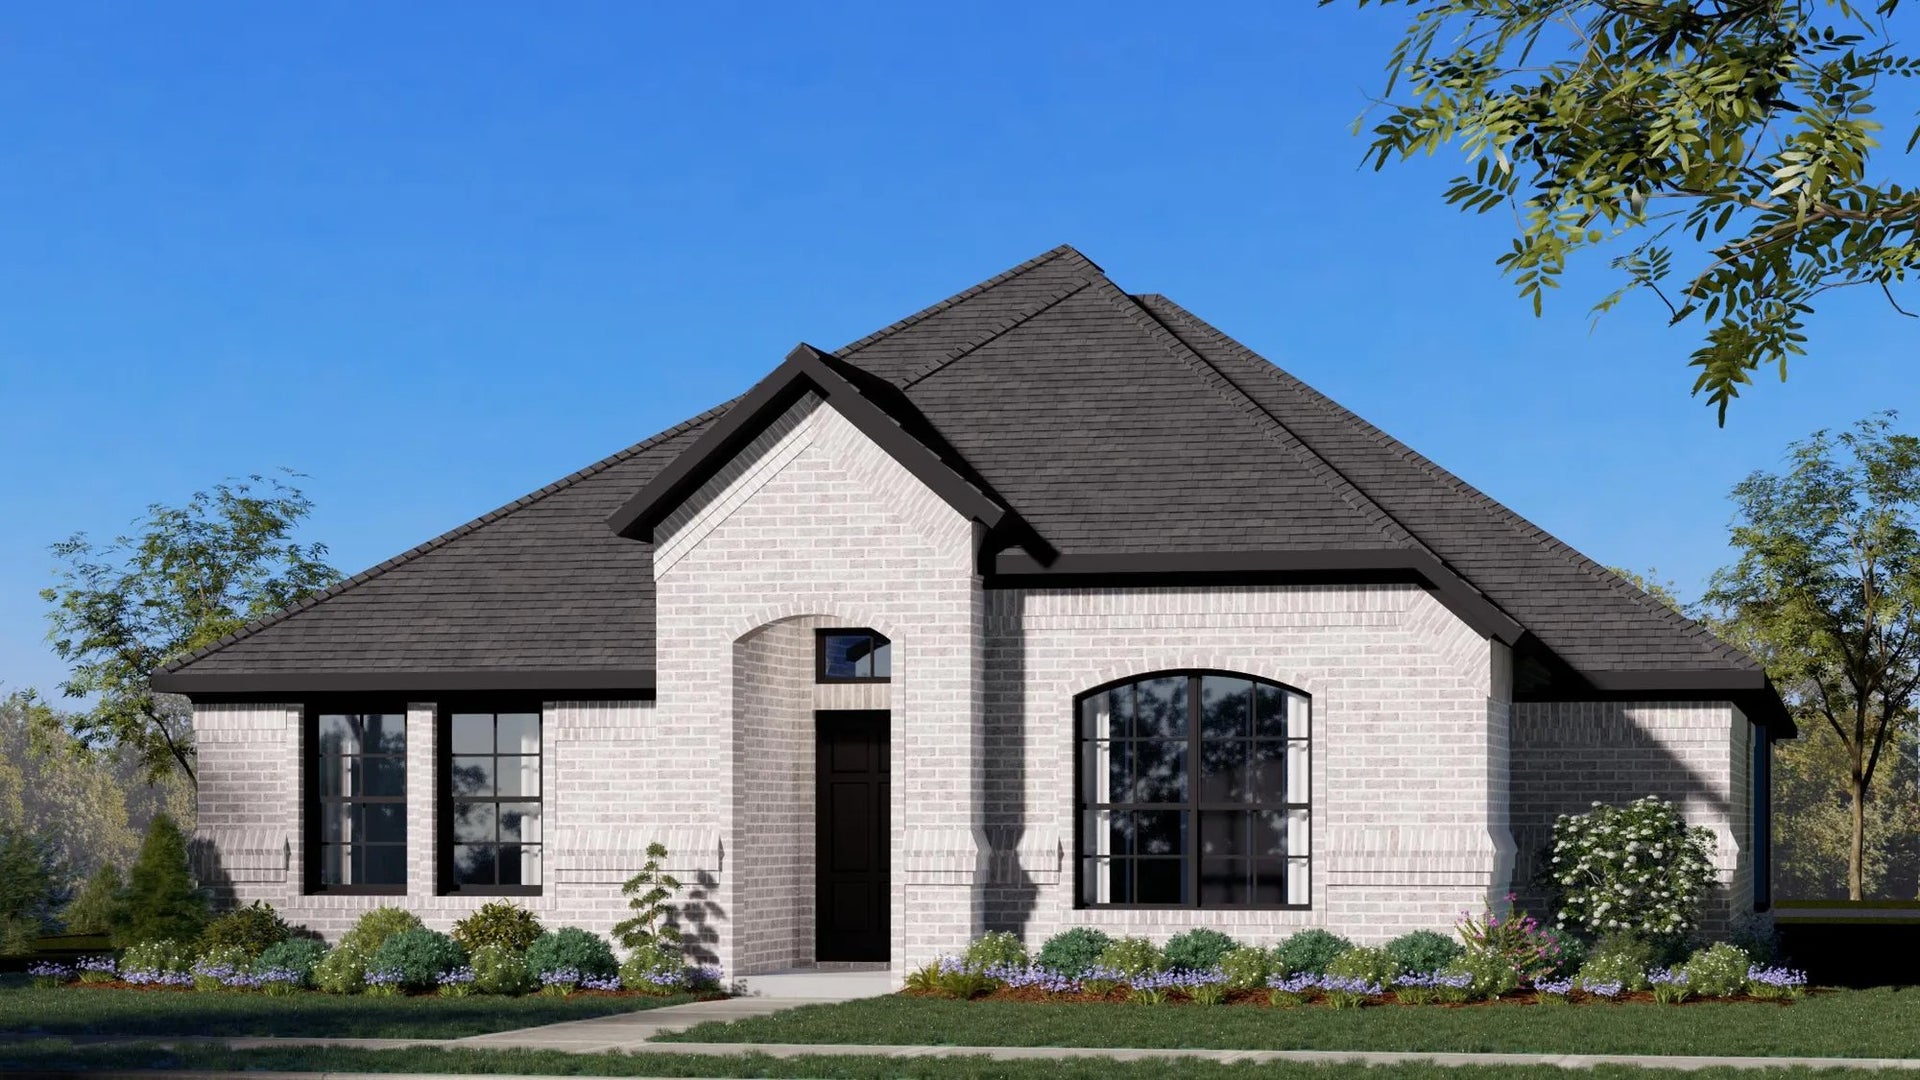 1578 C. 3br New Home in Heartland, TX